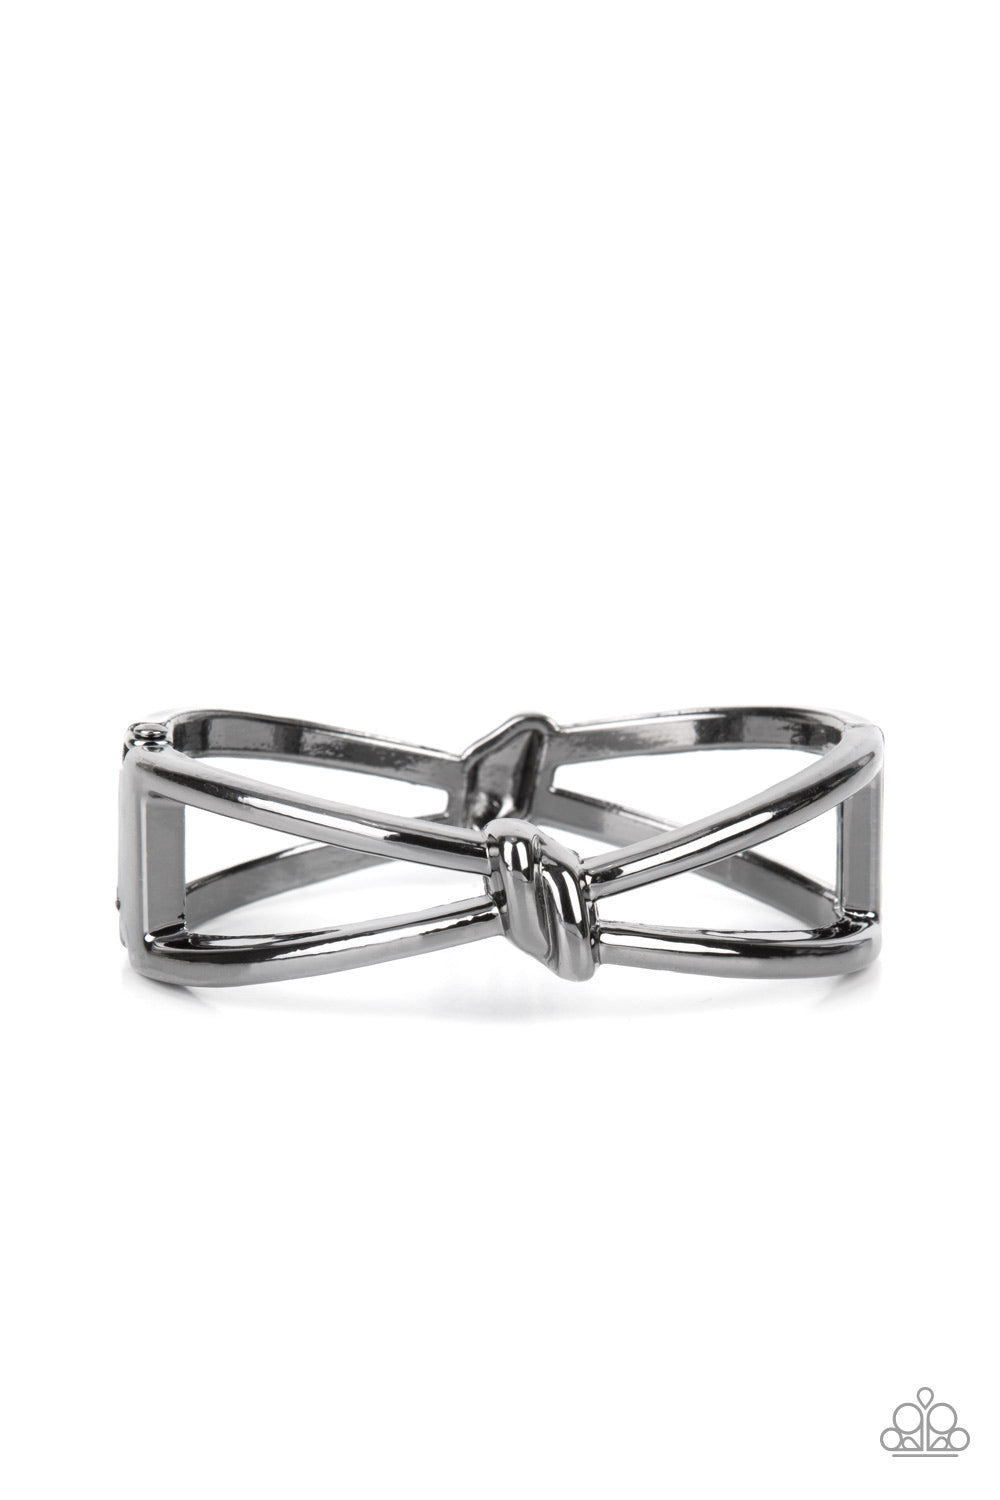 Striking gunmetal bars delicately knot at the top and bottom of the wrist, resulting in an edgy bangle-like bracelet